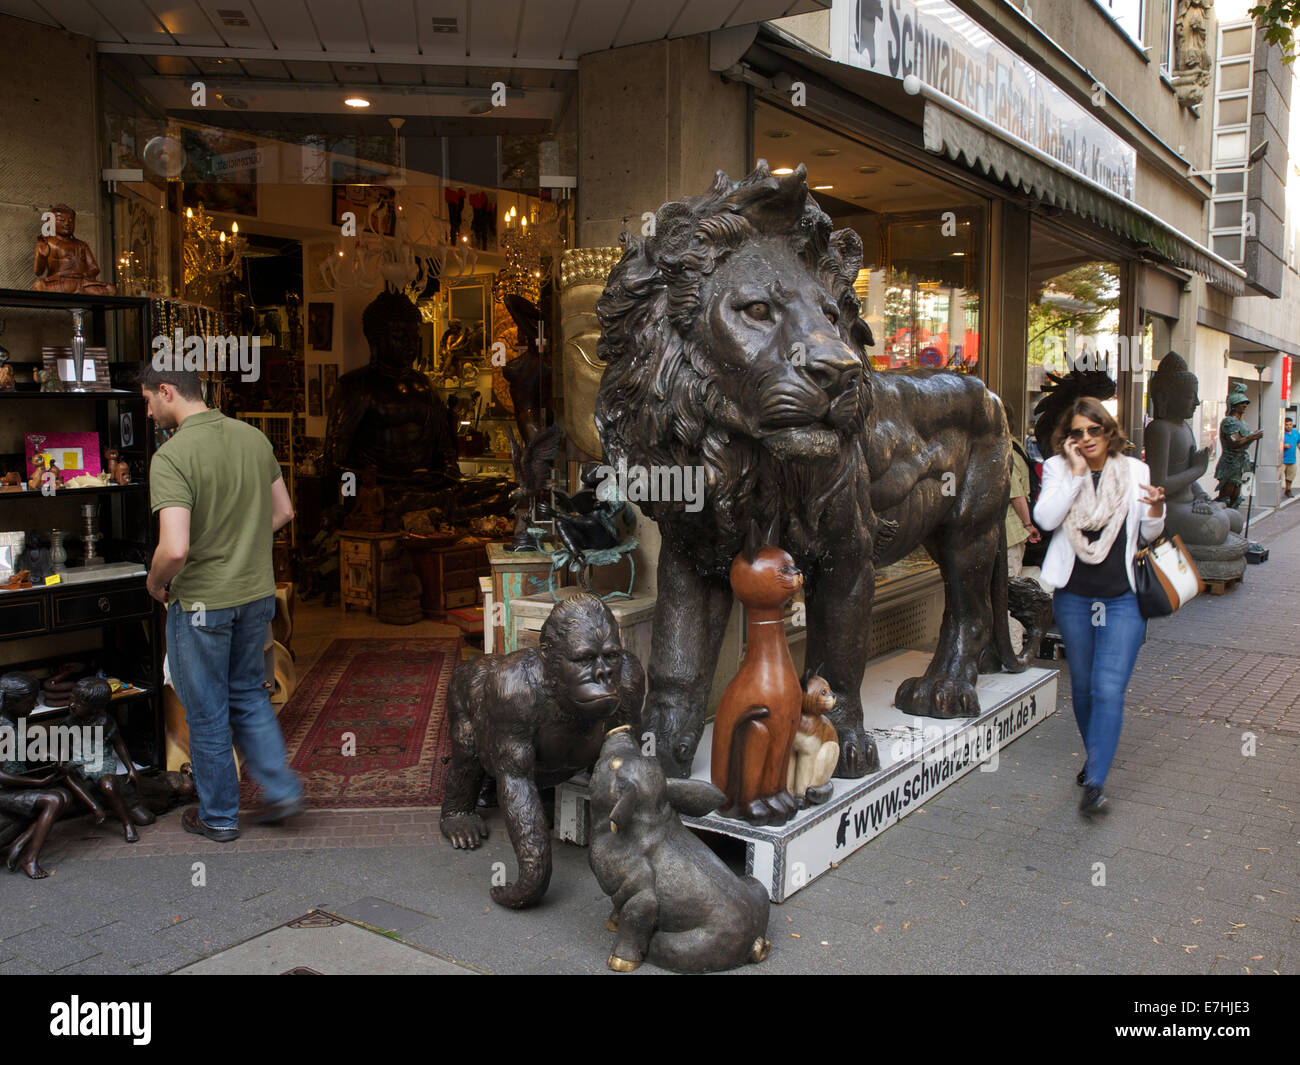 Shop in the city center of Cologne with huge bronze lion and people, Cologne, NRW, Germany Stock Photo